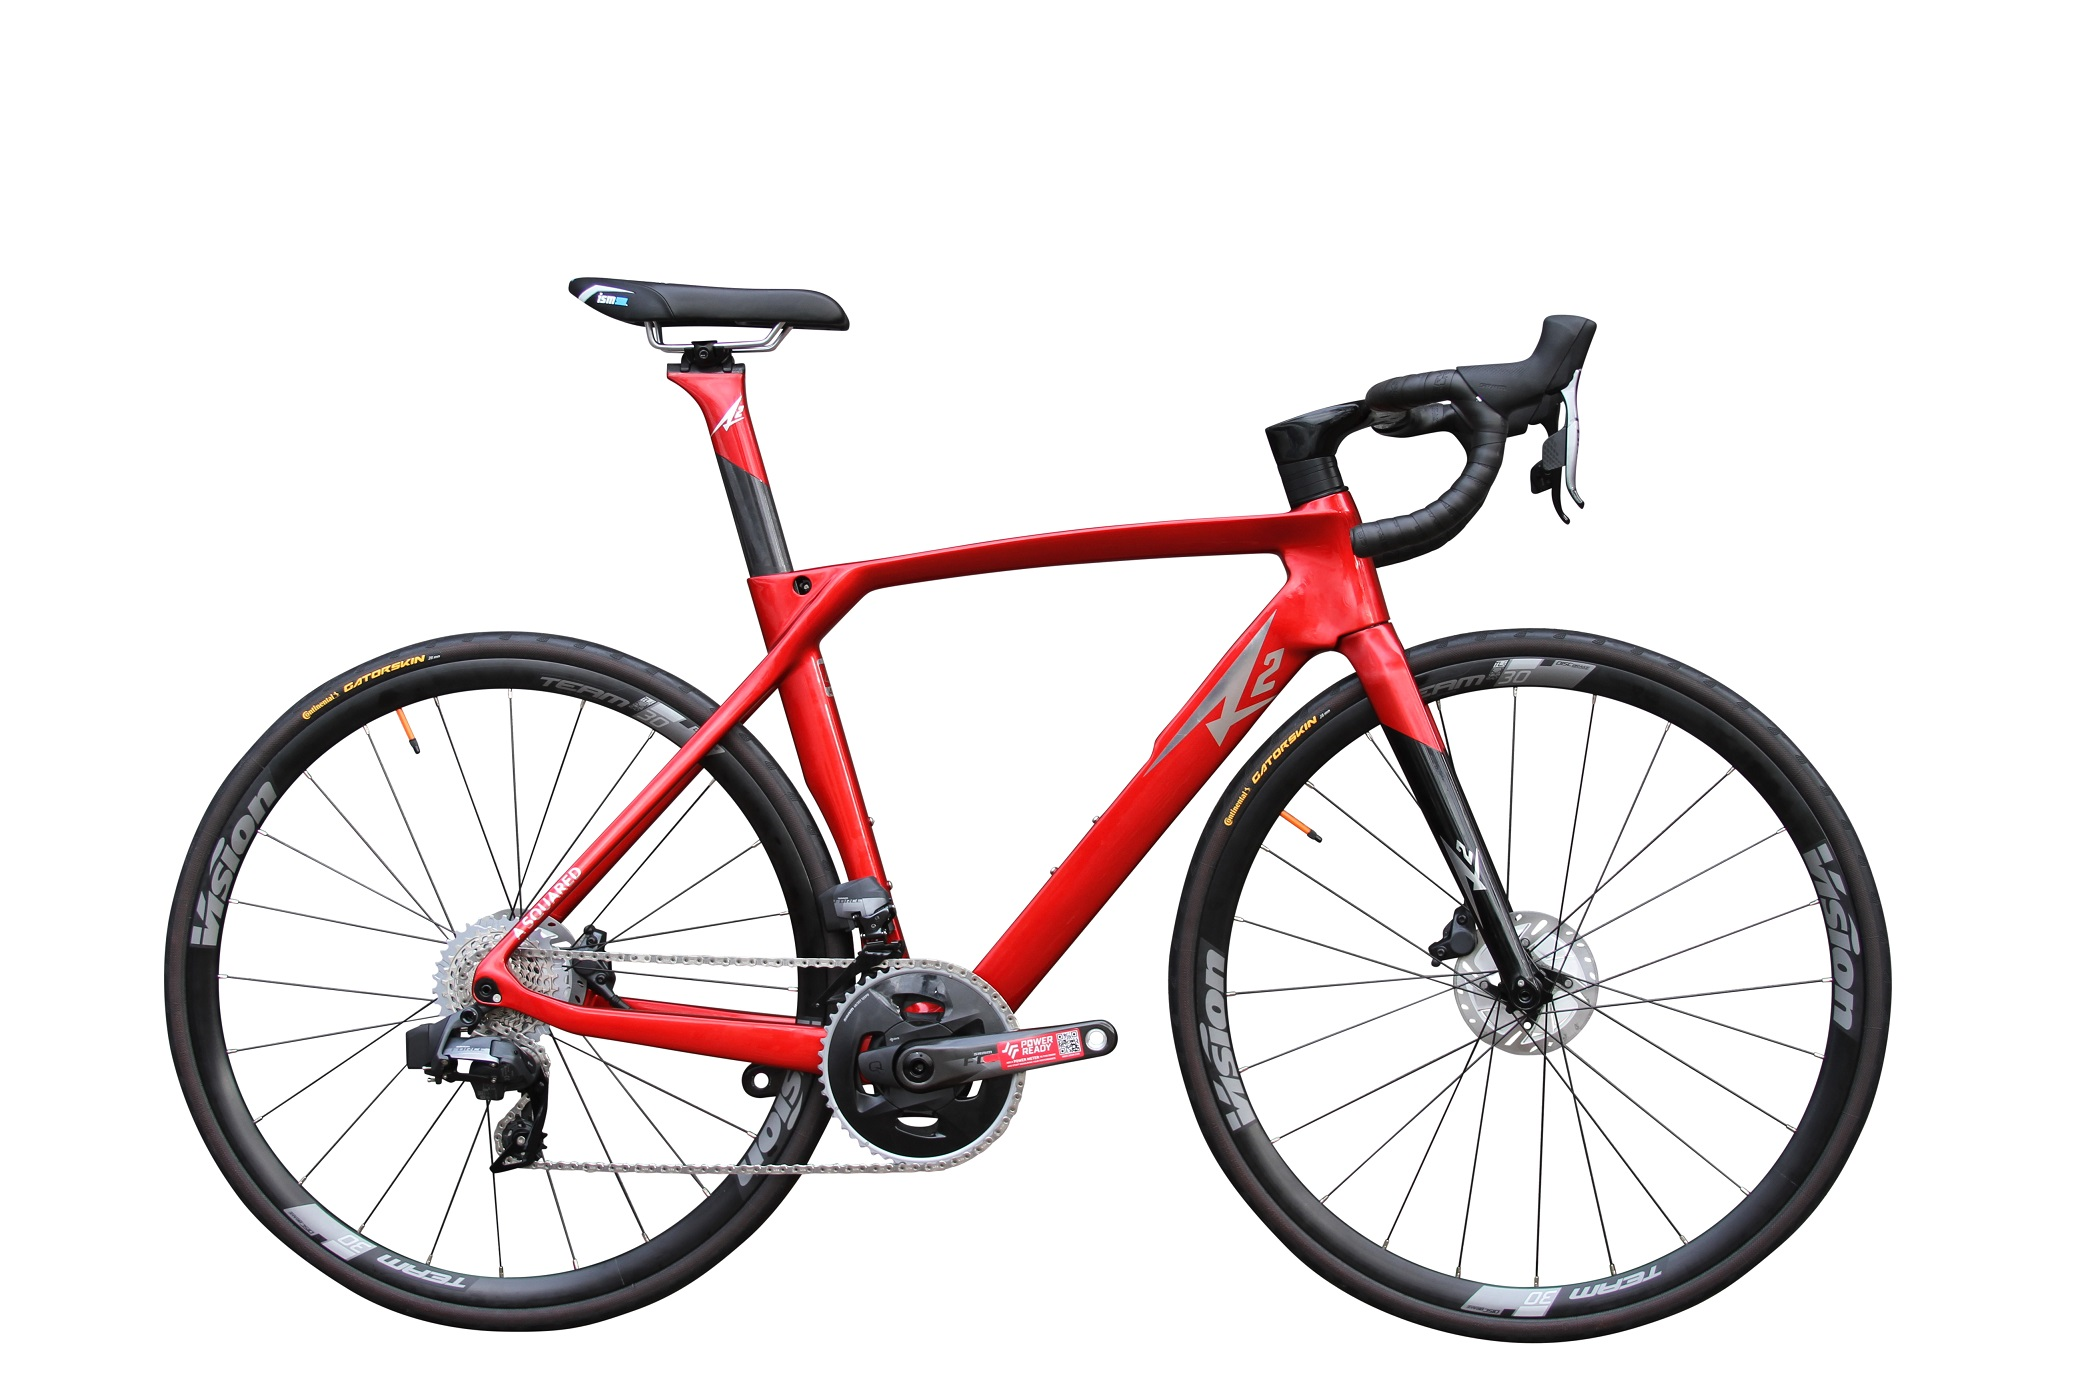 A2 Bikes' Road Phreak RP1, shown with SRAM Force group (MSRP $2000)